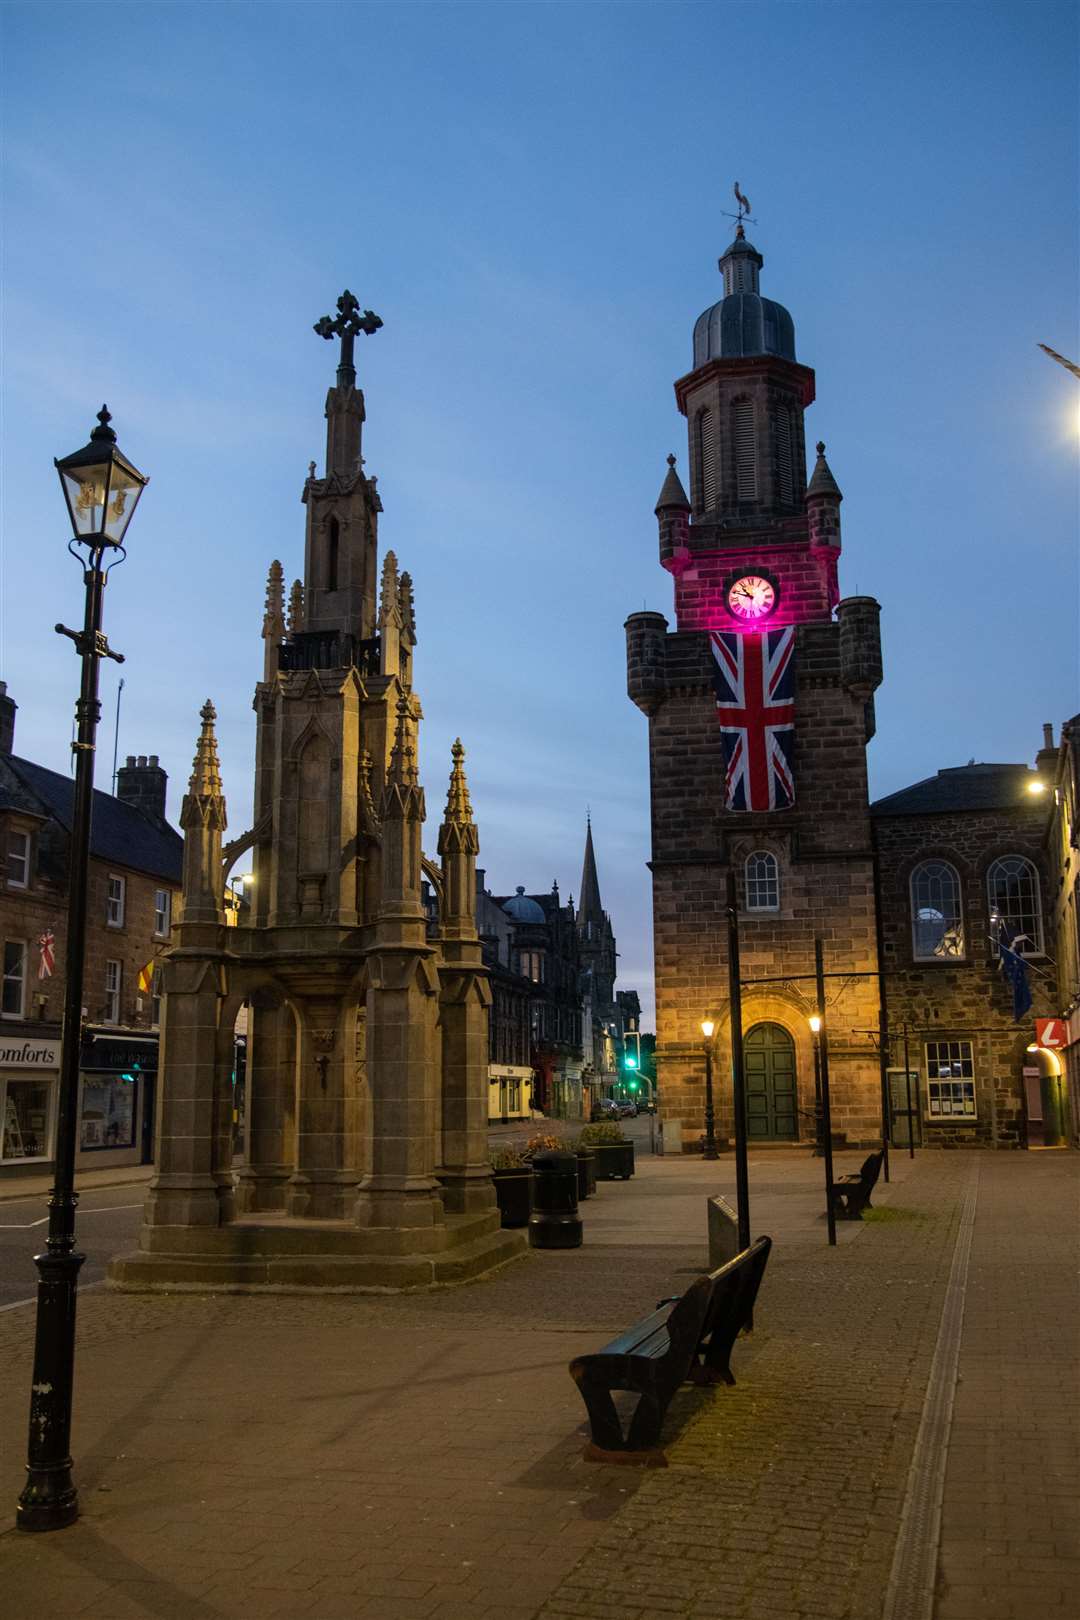 The Tolbooth clock face was previously lit up for the Queen's Platinum Jubilee celebrations.